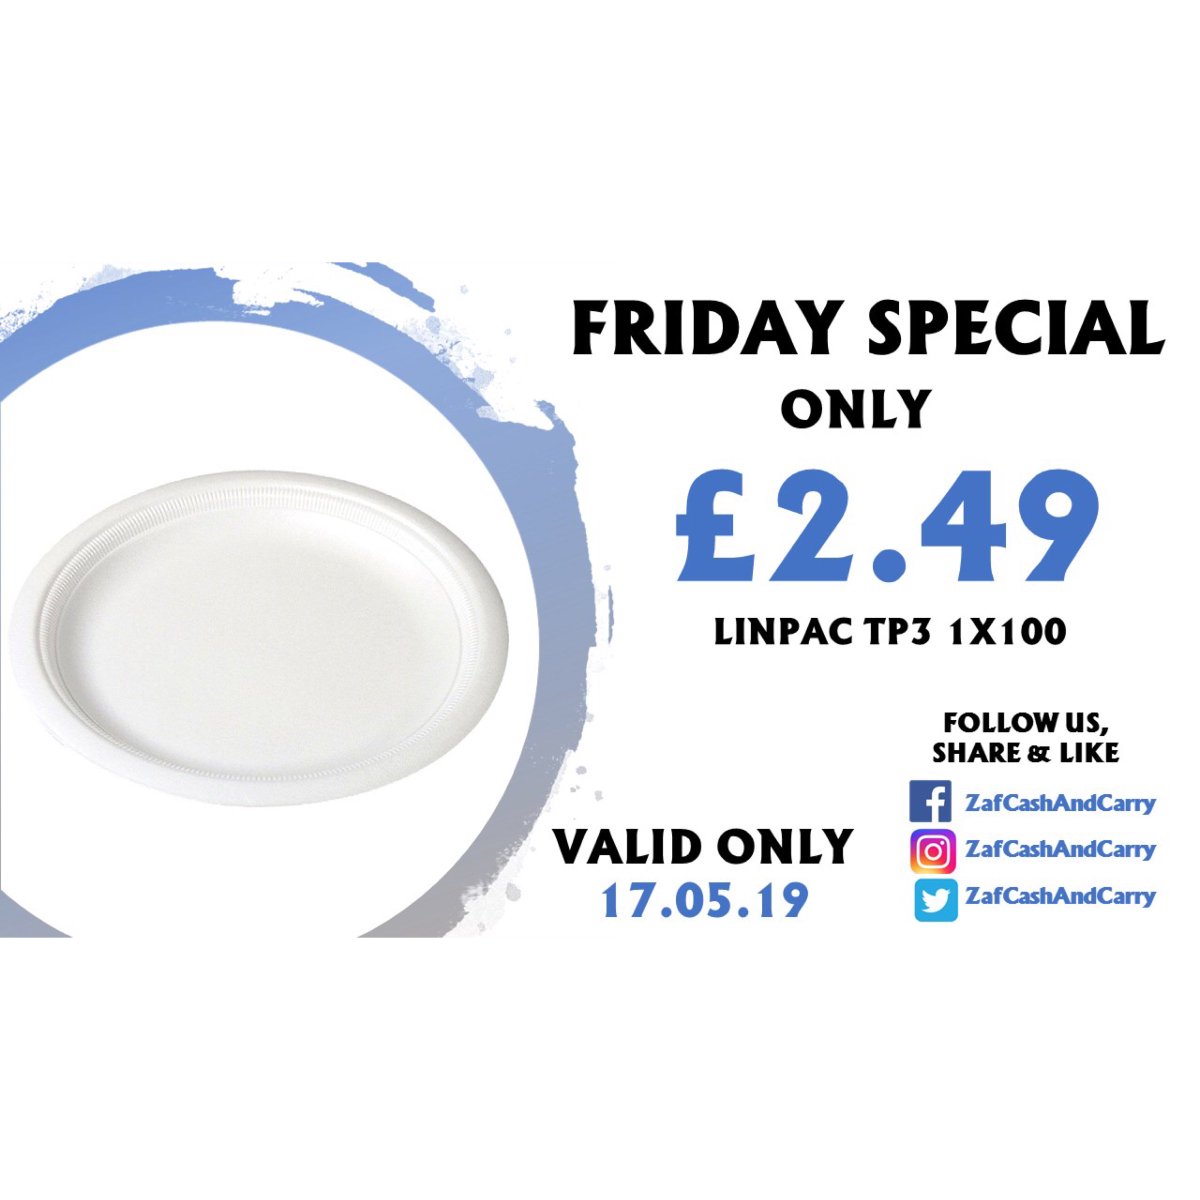 This Week's Friday Special is ...

Linpac TP3 1X100

ONLY £2.49

VALID ONLY (17/05/19)

#ramadan #disposableplates #iftar #breakingfast #friyay #birmingham #tp3 #zafcashandcarry #cashandcarry